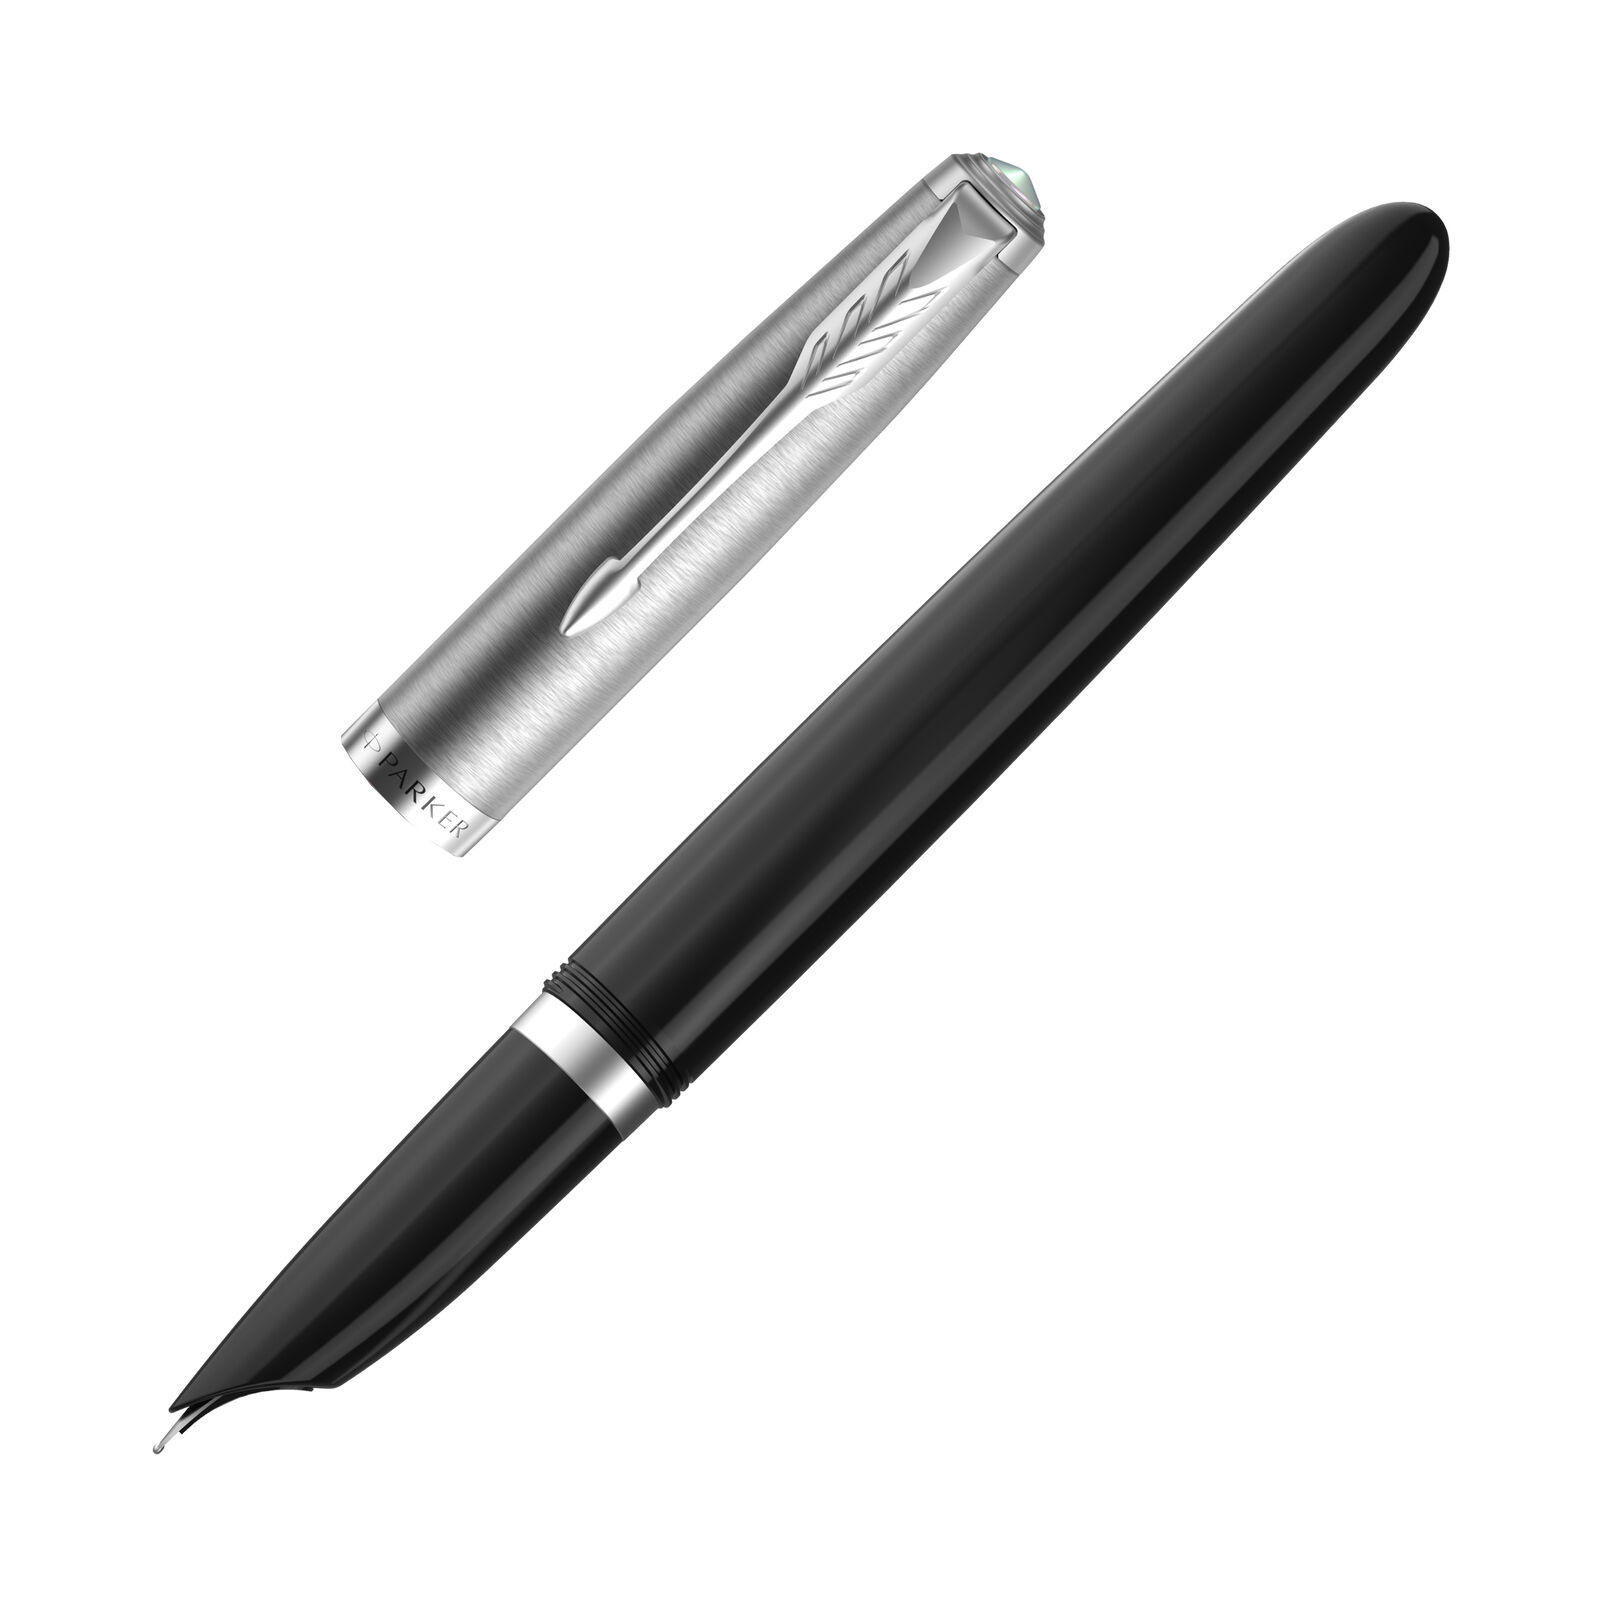 Parker 51 Fountain Pen in Black with Chrome Trim - Fine Point - NEW in Box